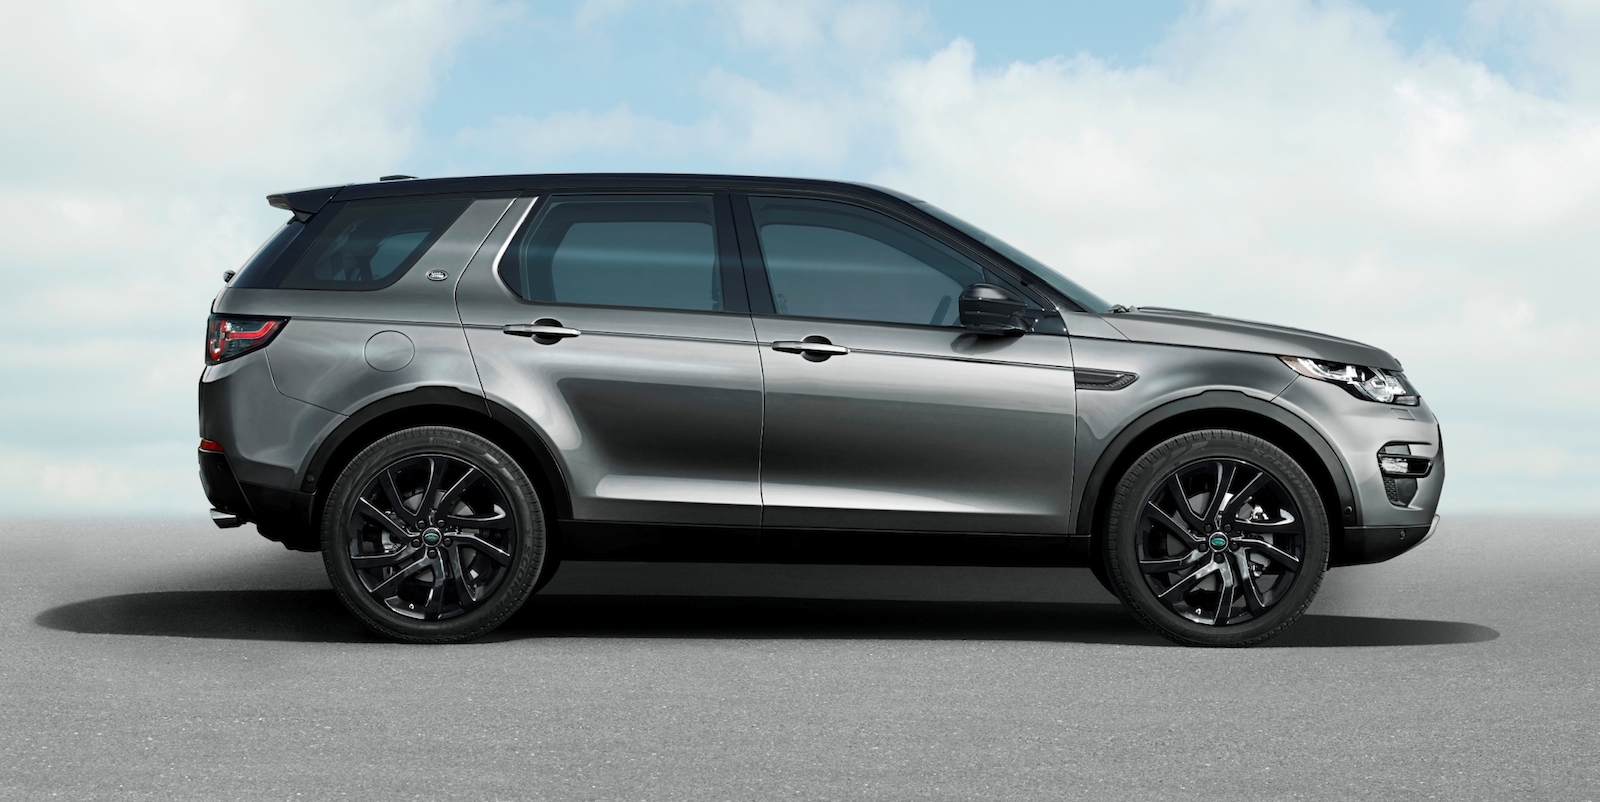 2015 Land Rover Discovery Sport revealed Photos (1 of 14)